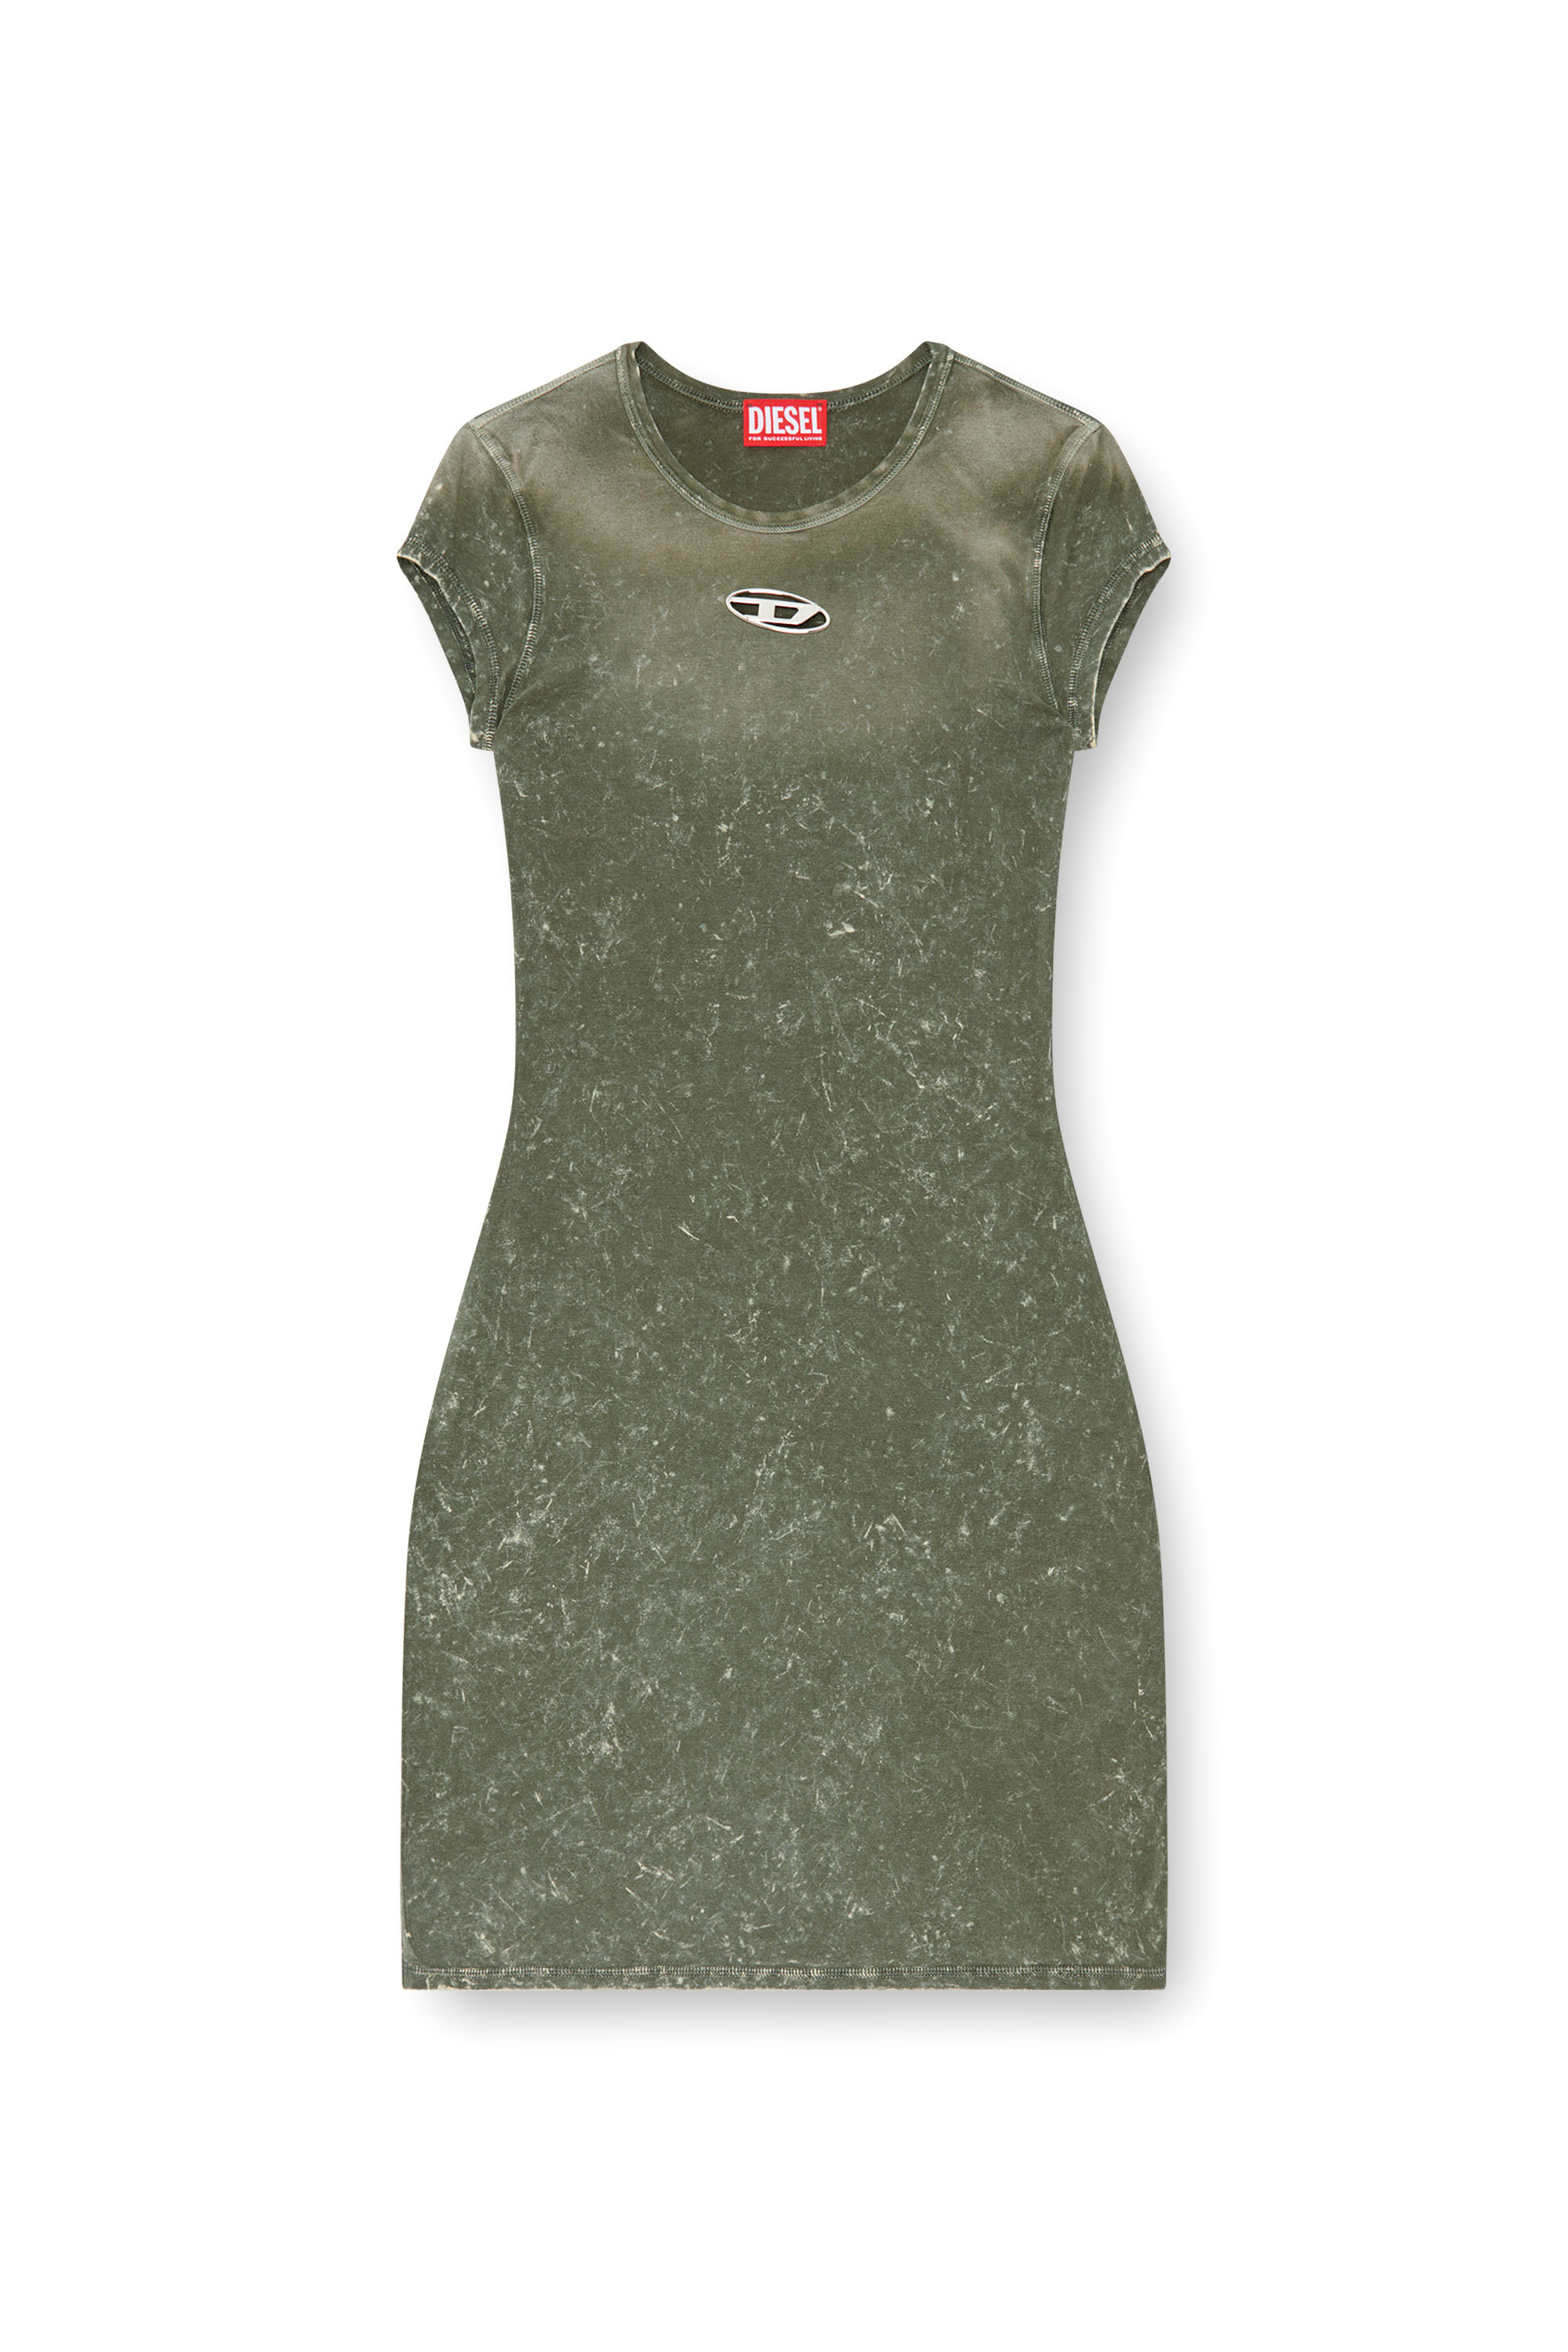 Diesel - D-ANGIEL-P1, Donna Short dress in marbled stretch jersey in Verde - Image 5